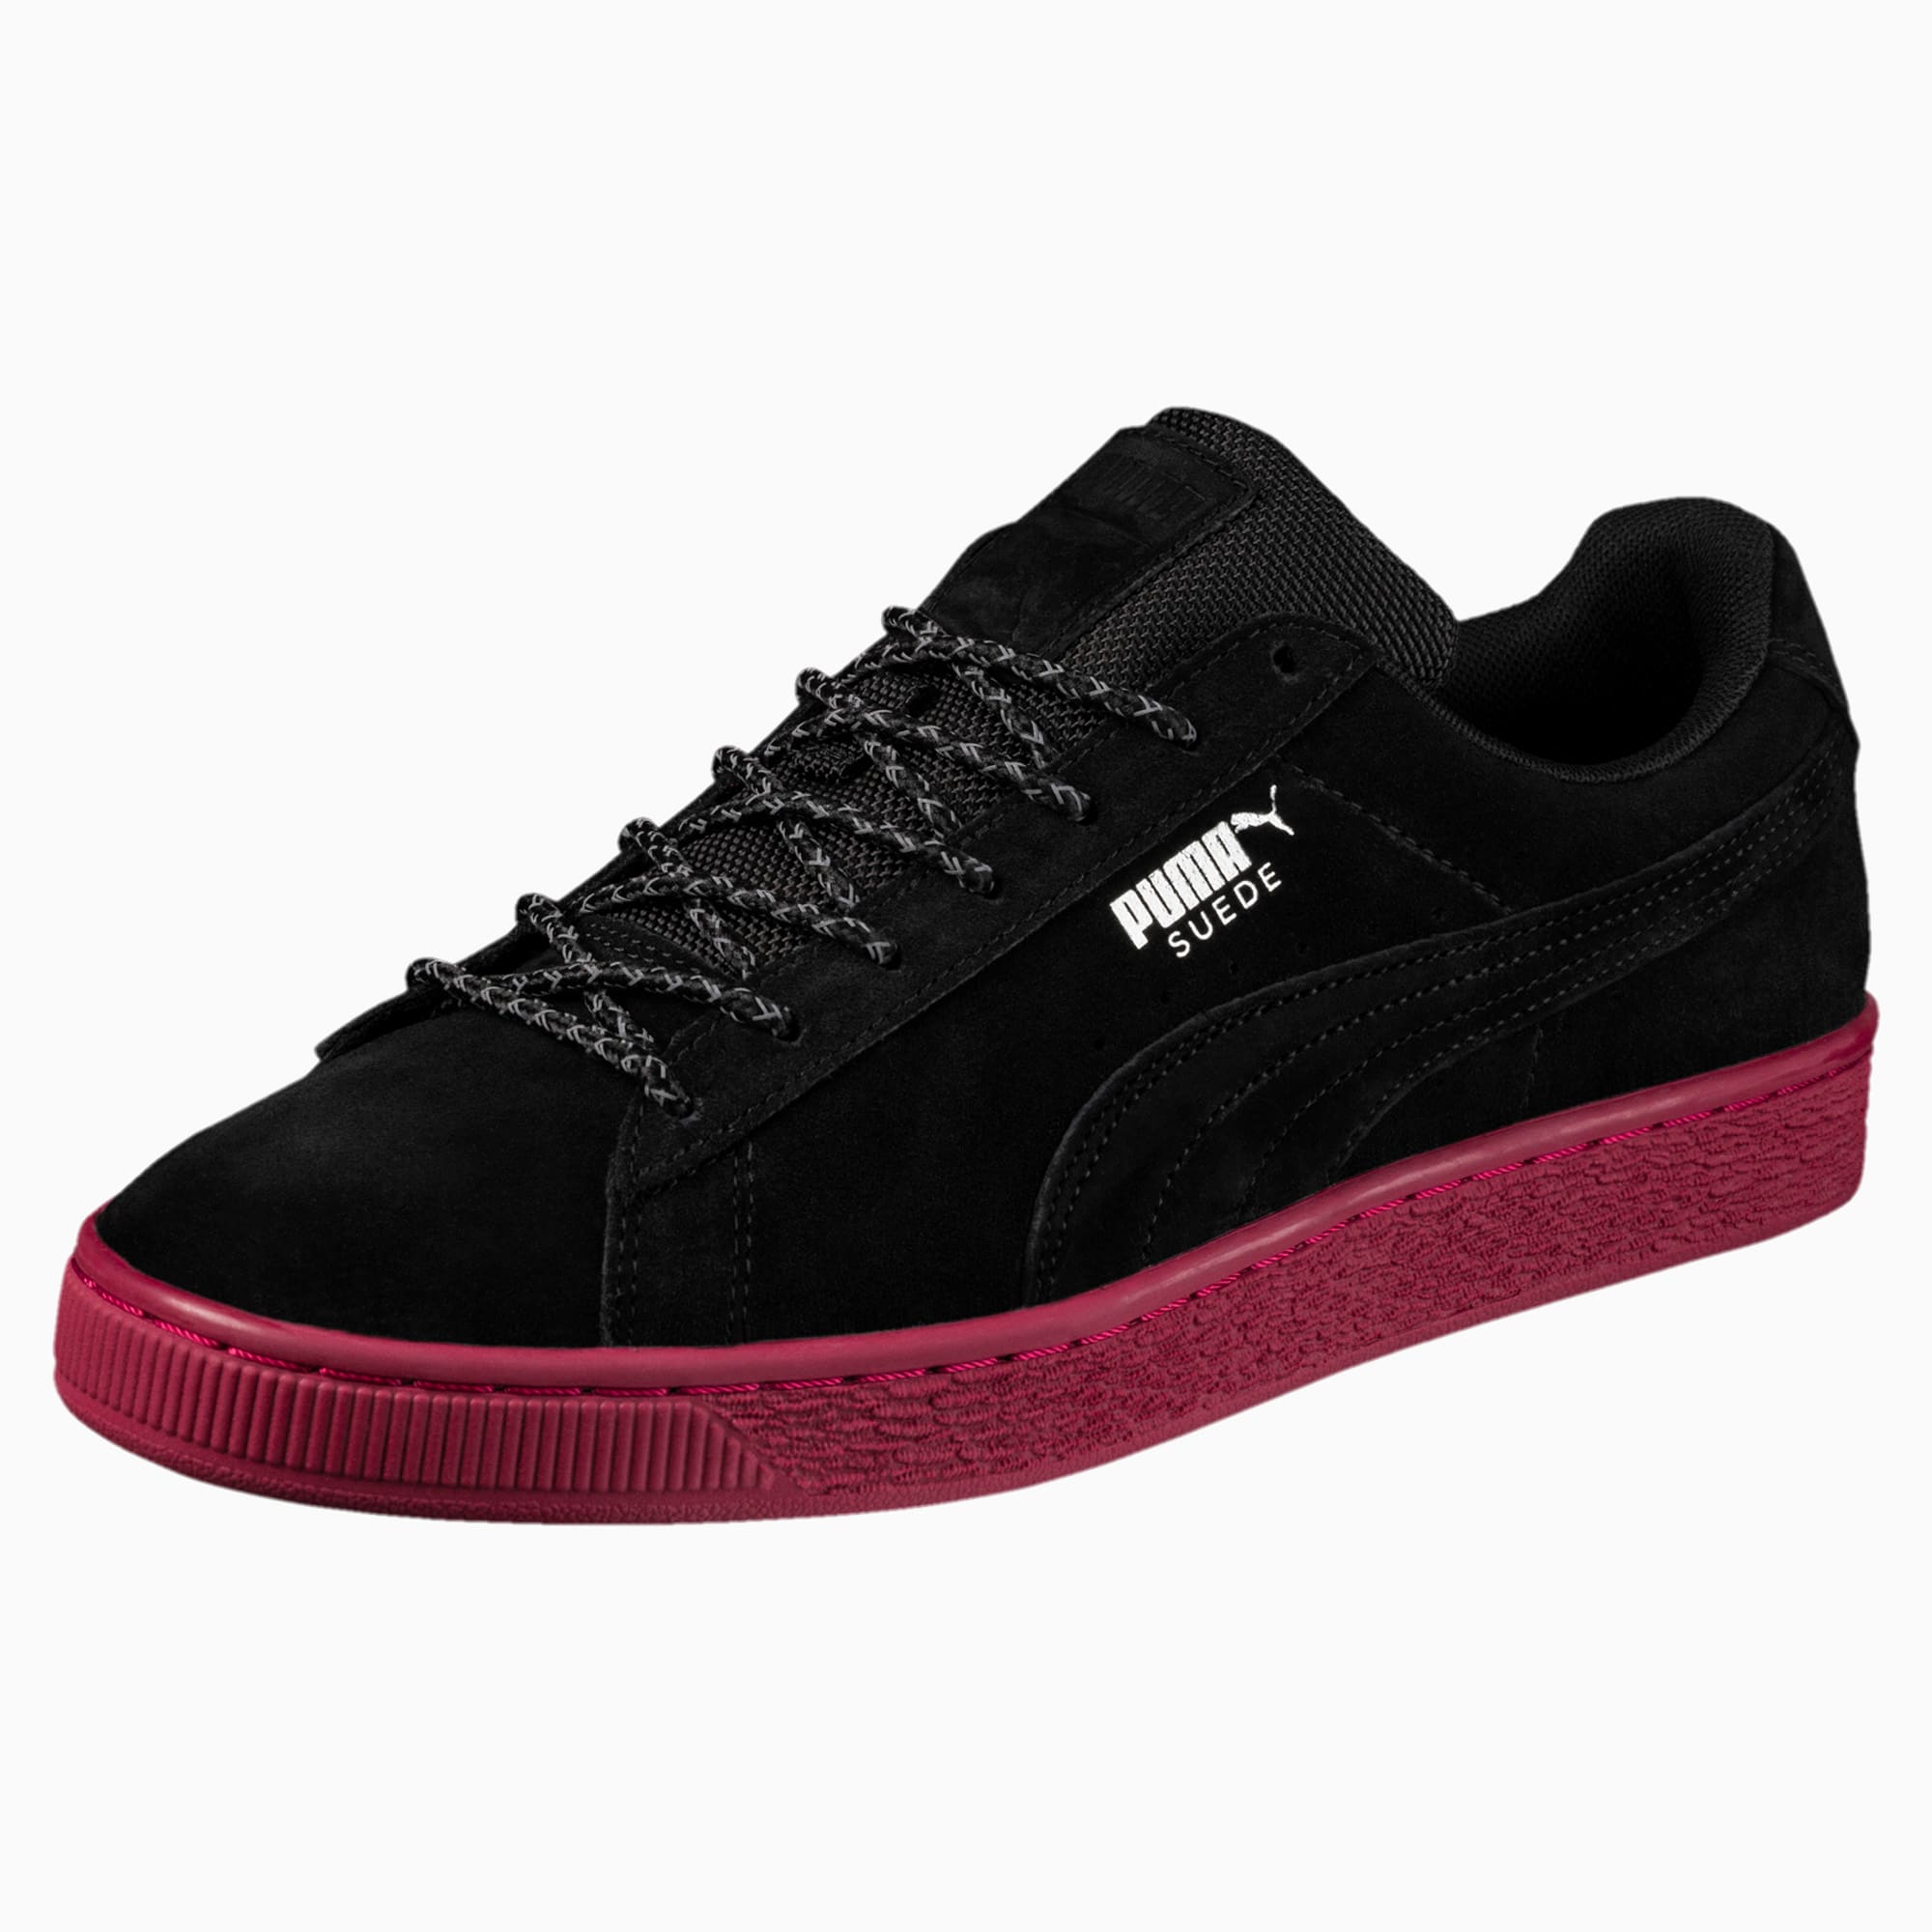 puma water resistant shoes